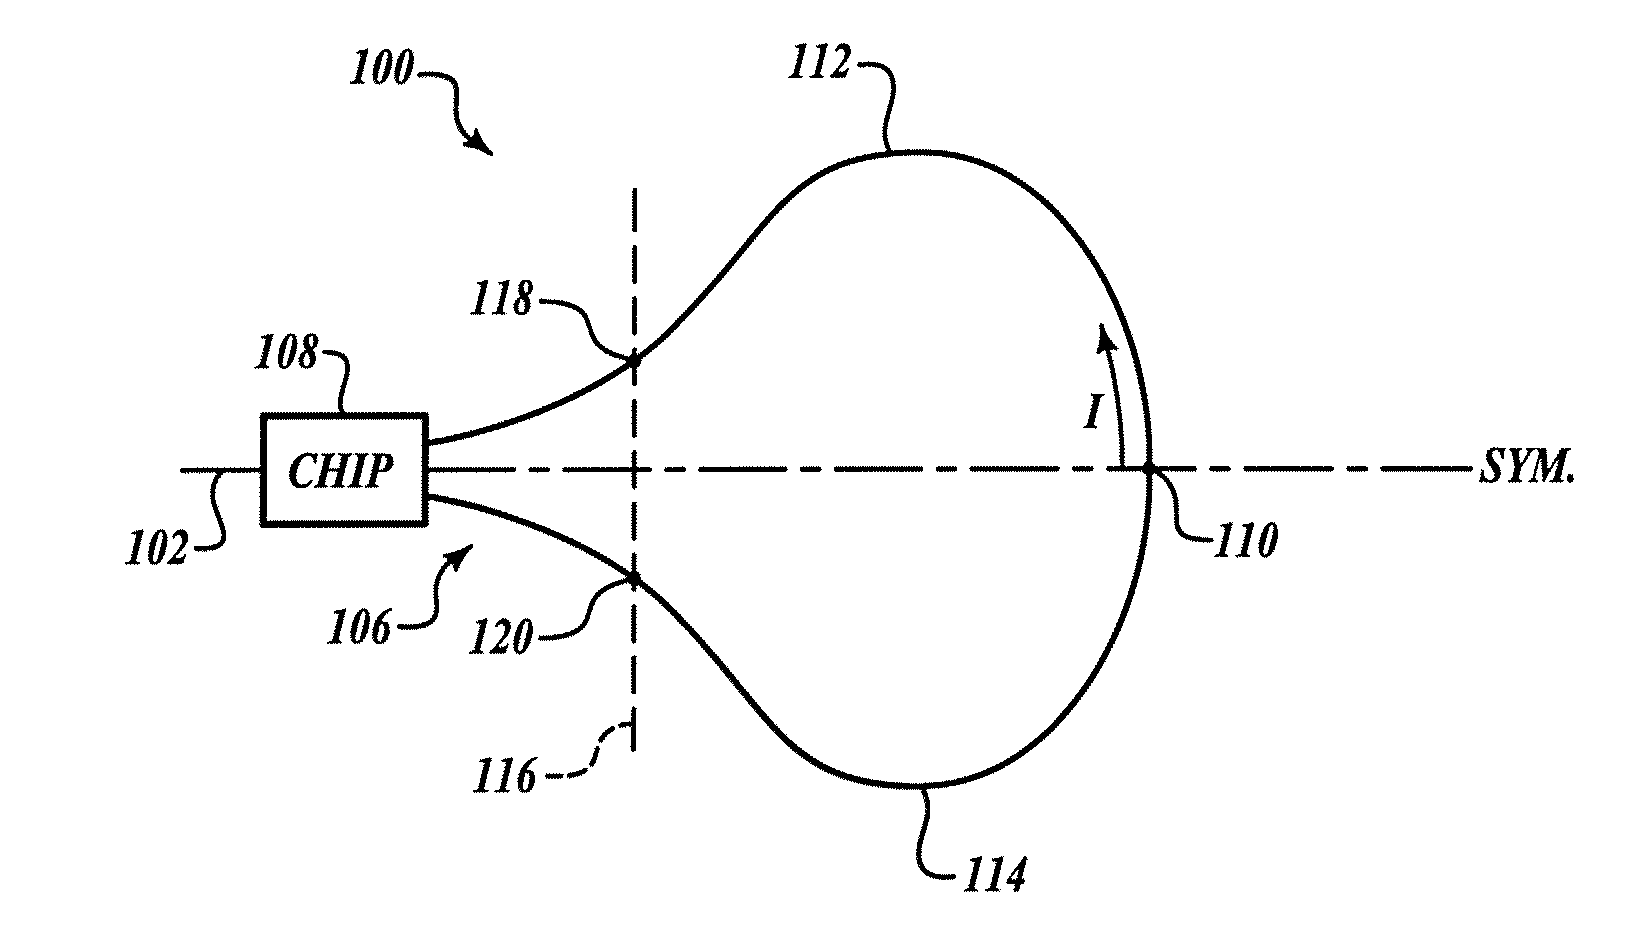 Octupole winding pattern for a fiber optic coil